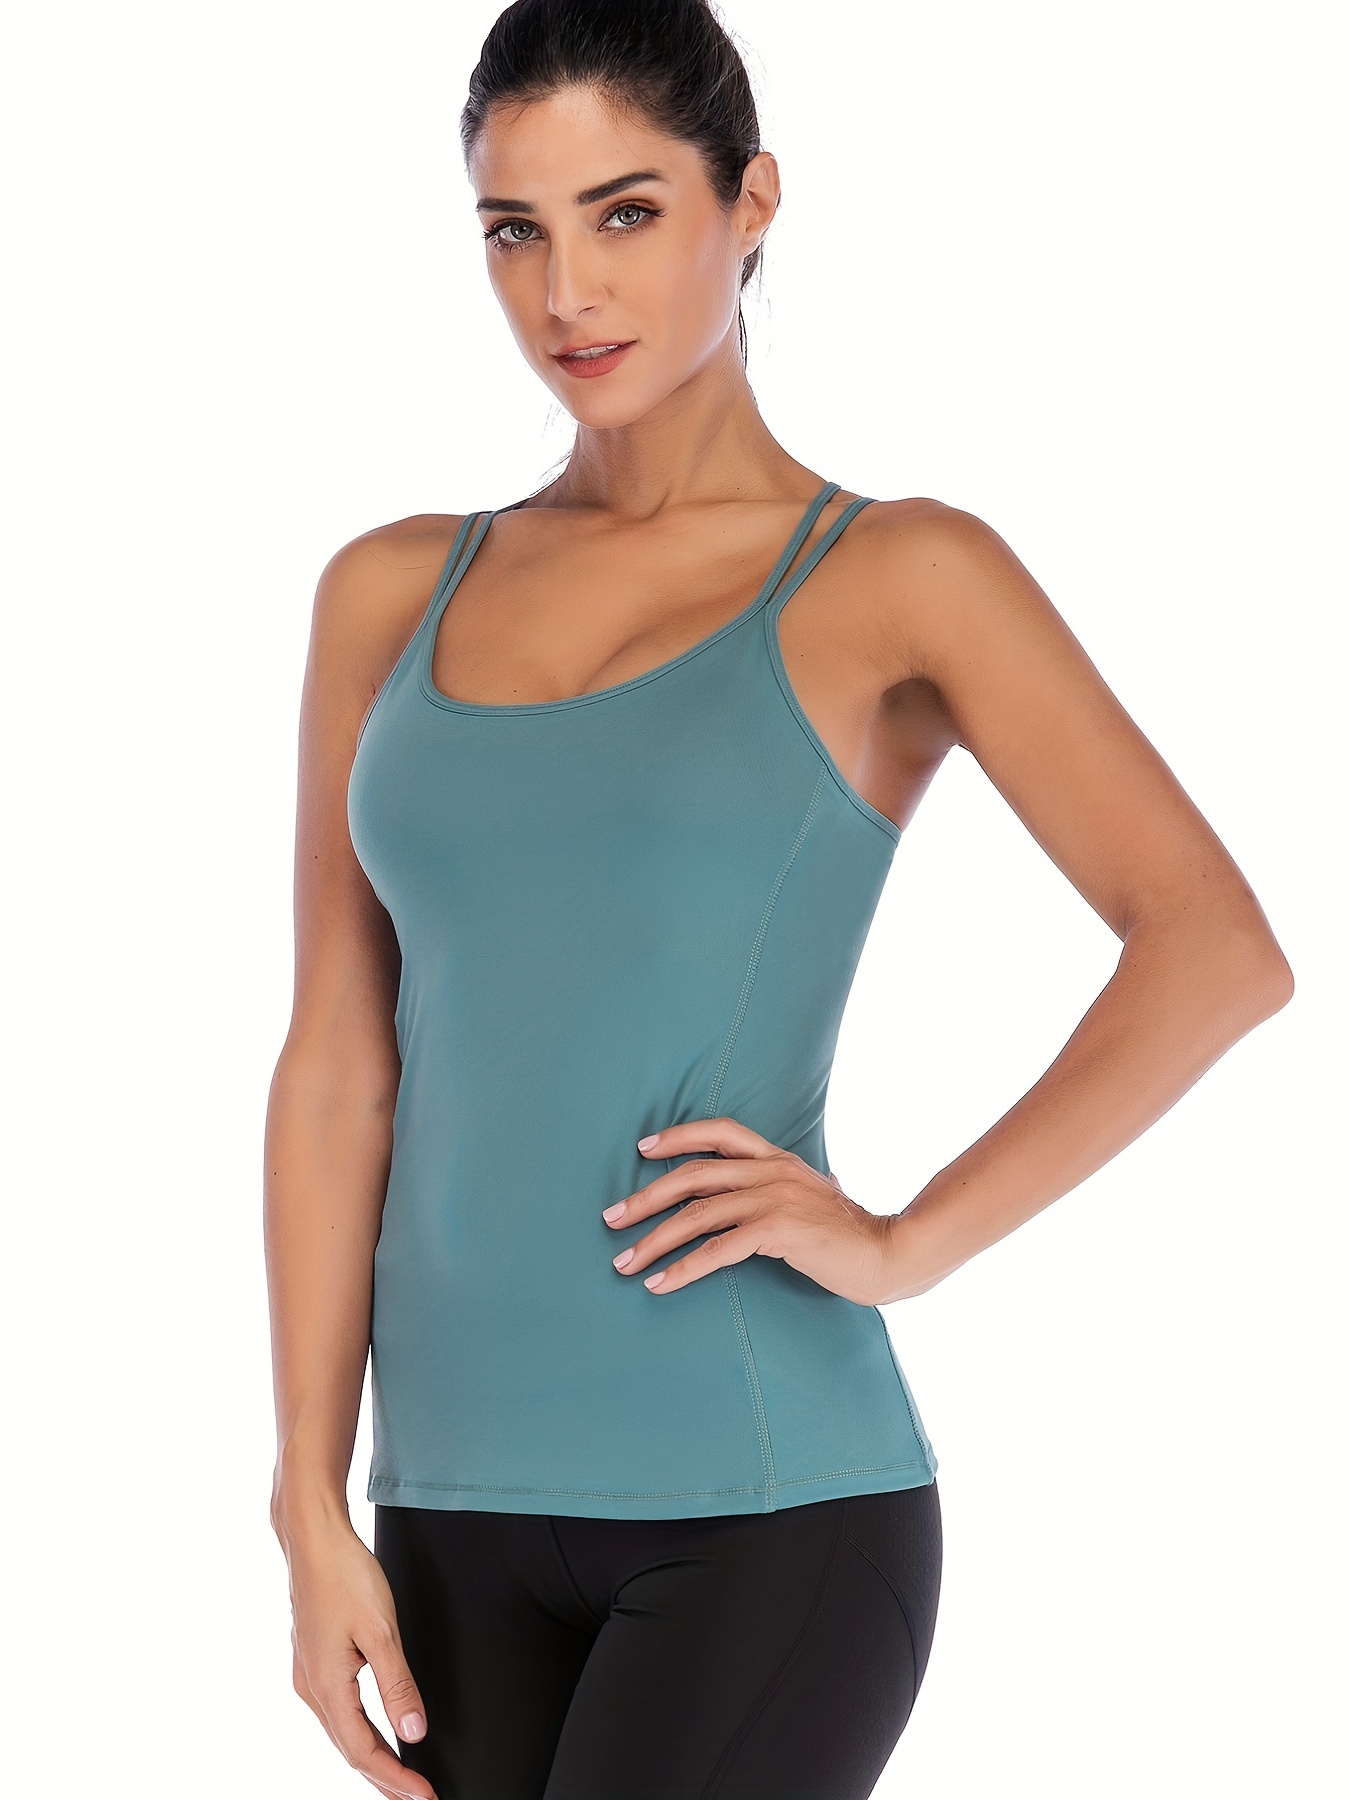 Women's Yoga Tops with Built in Bra Workout Gym Tank Tops Sports Racerback  Vest